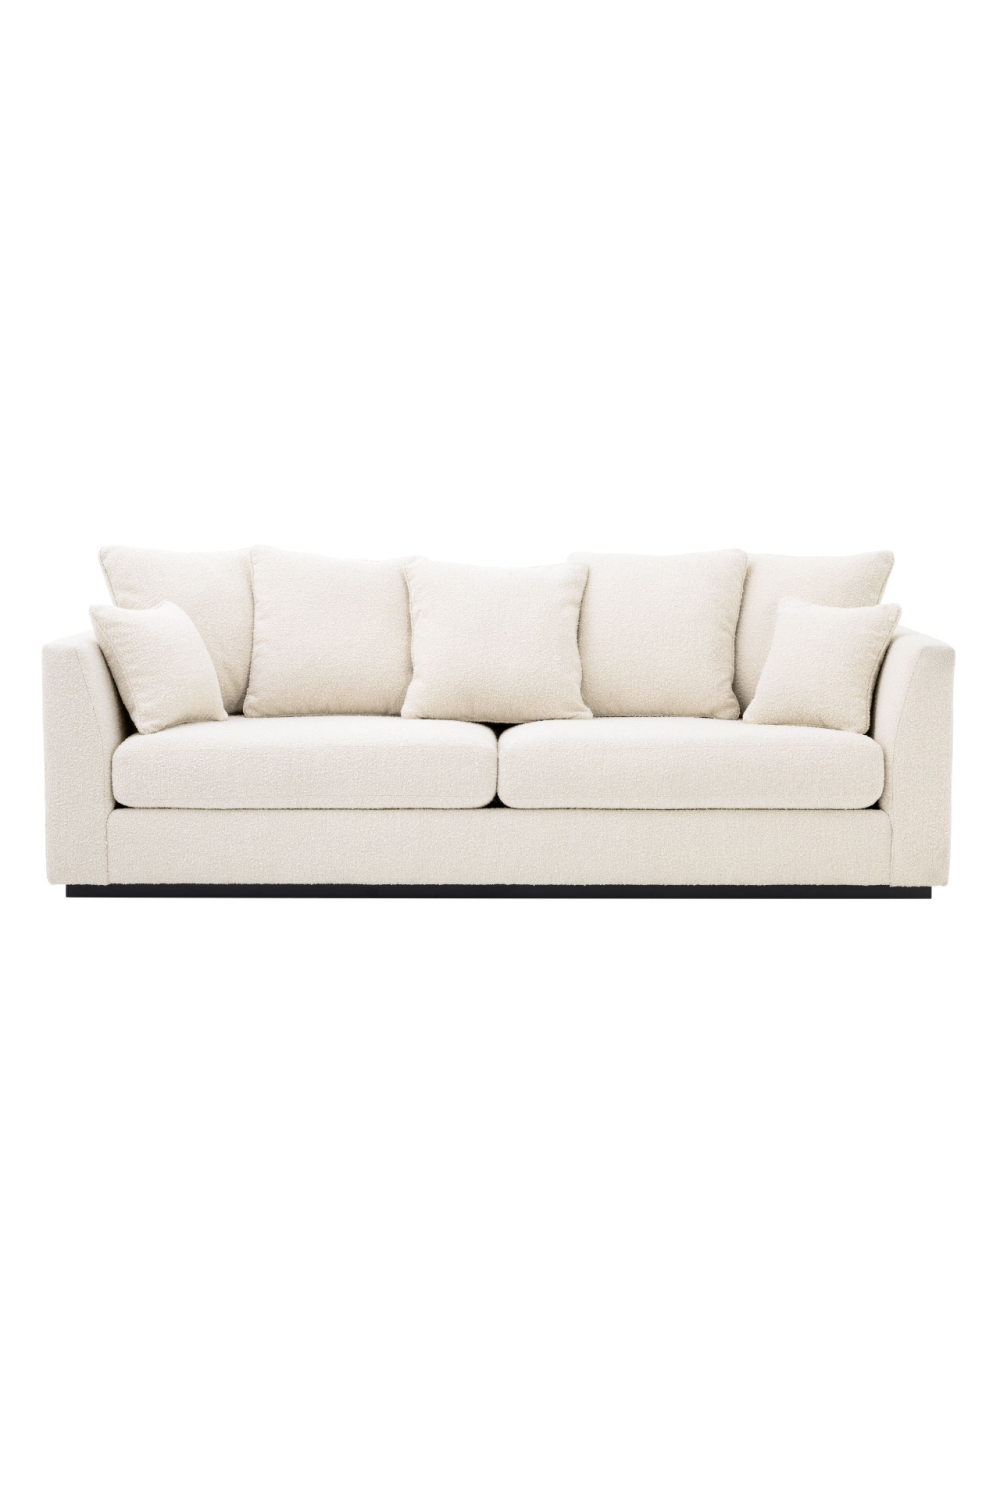 Image of Cream Boucl Sofa With Cushions | Eichholtz Taylor